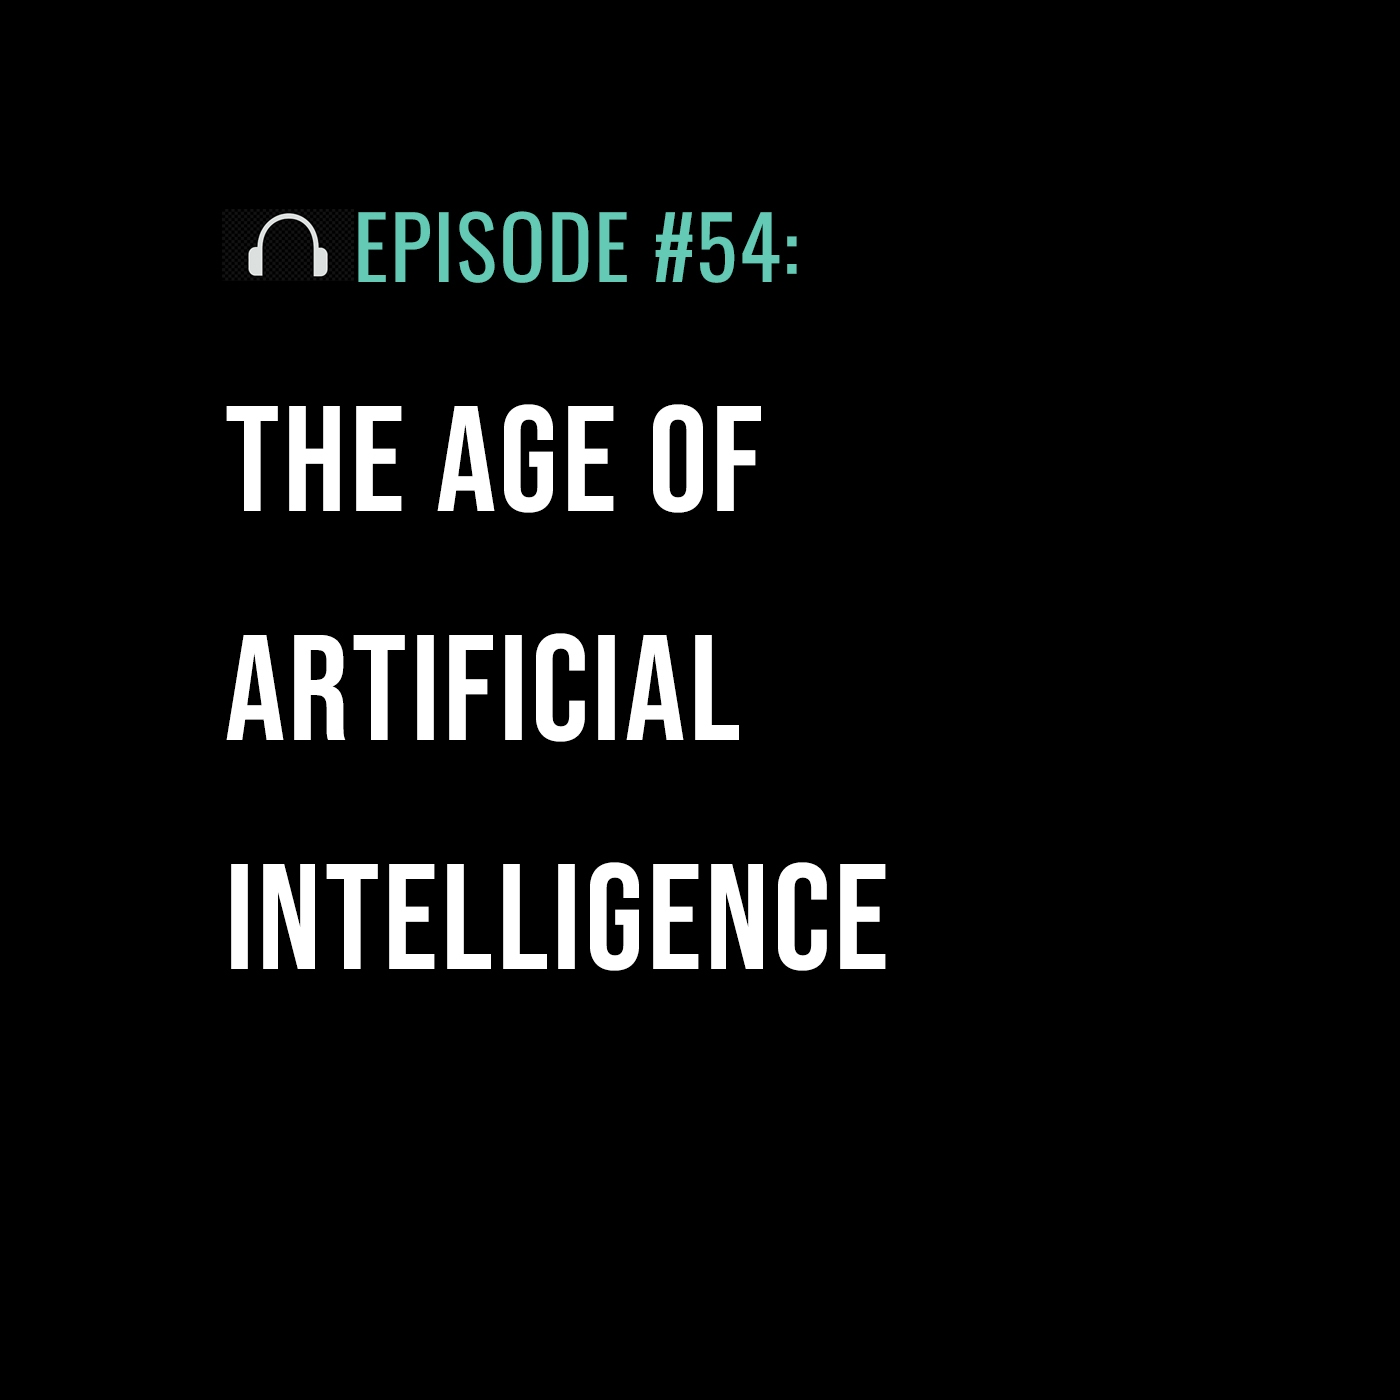 The Age of Artificial Intelligence